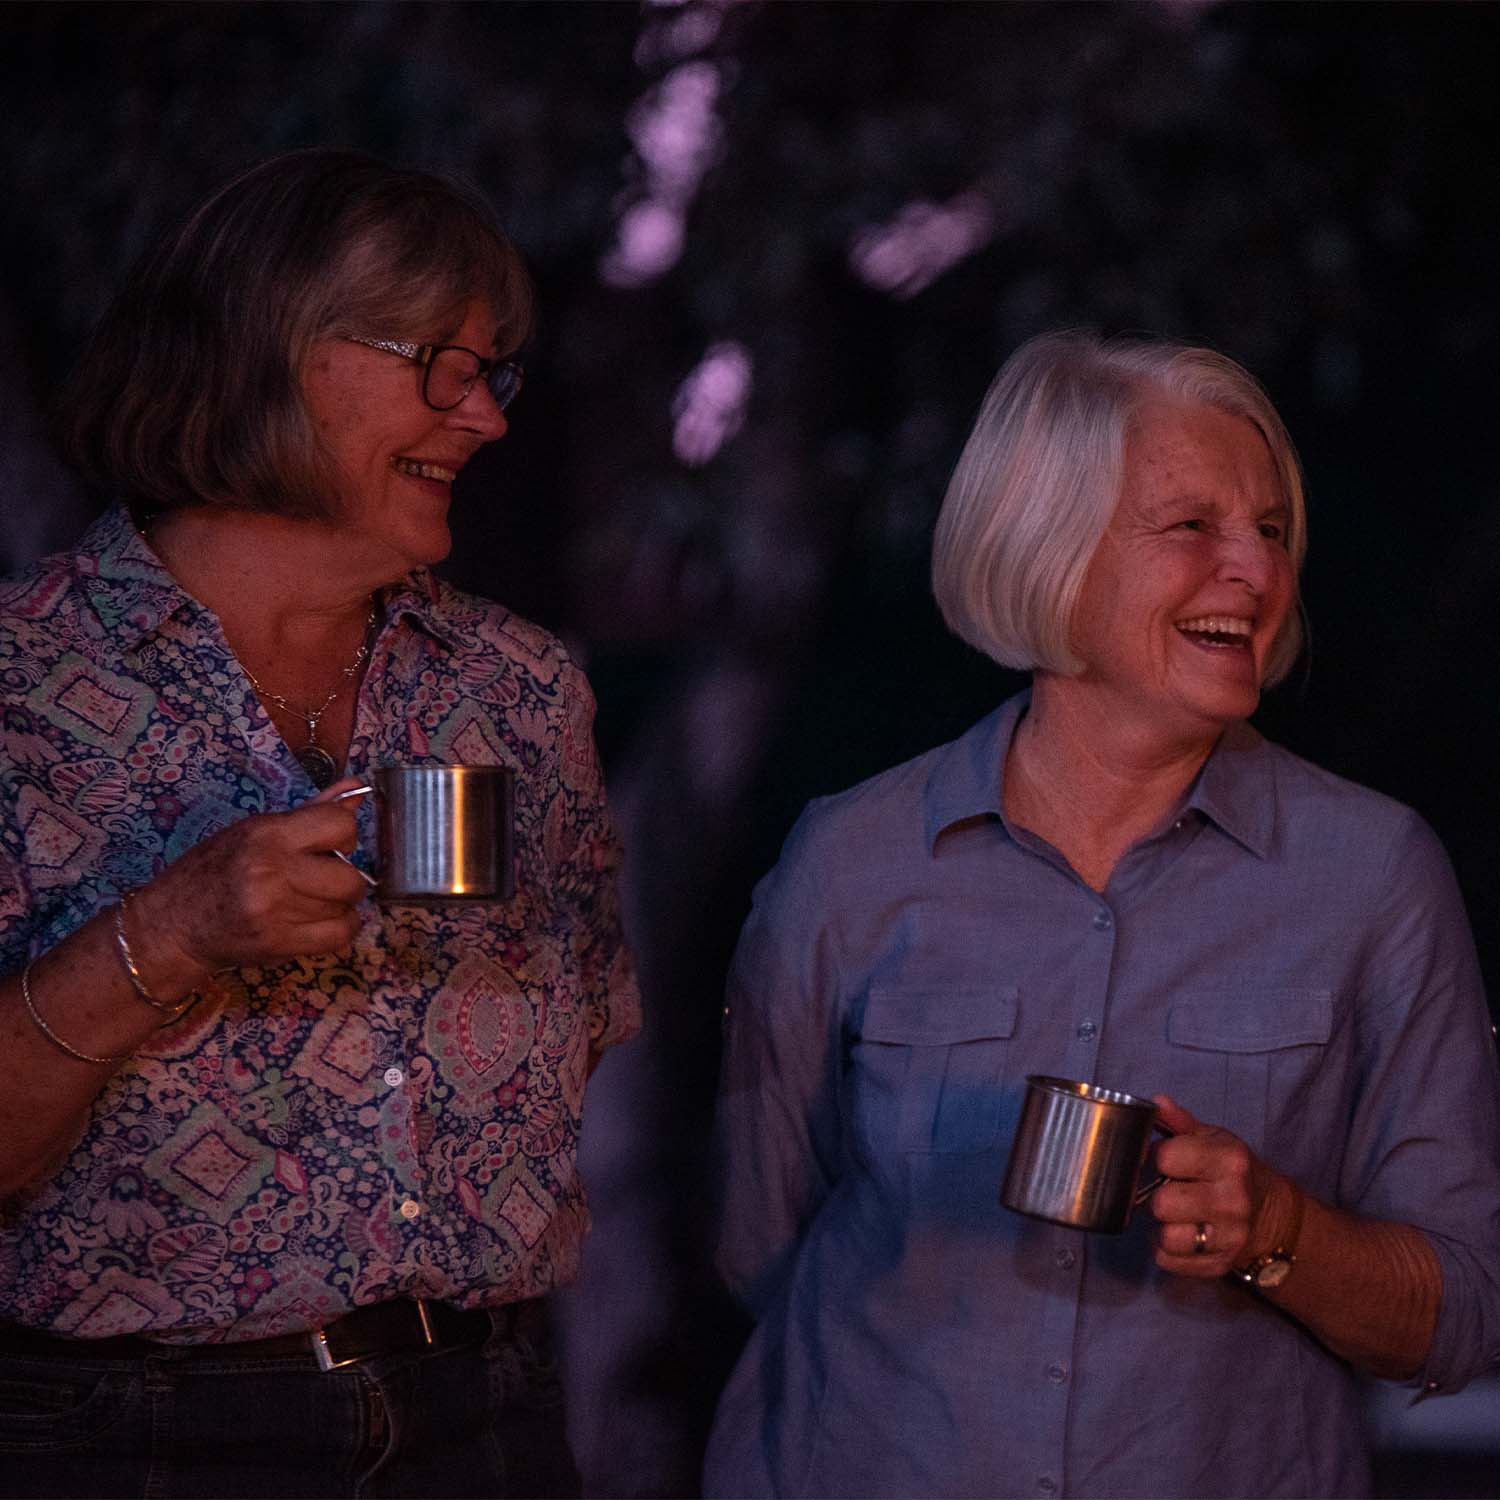 Two women looking off to the side holding metallic cups at night